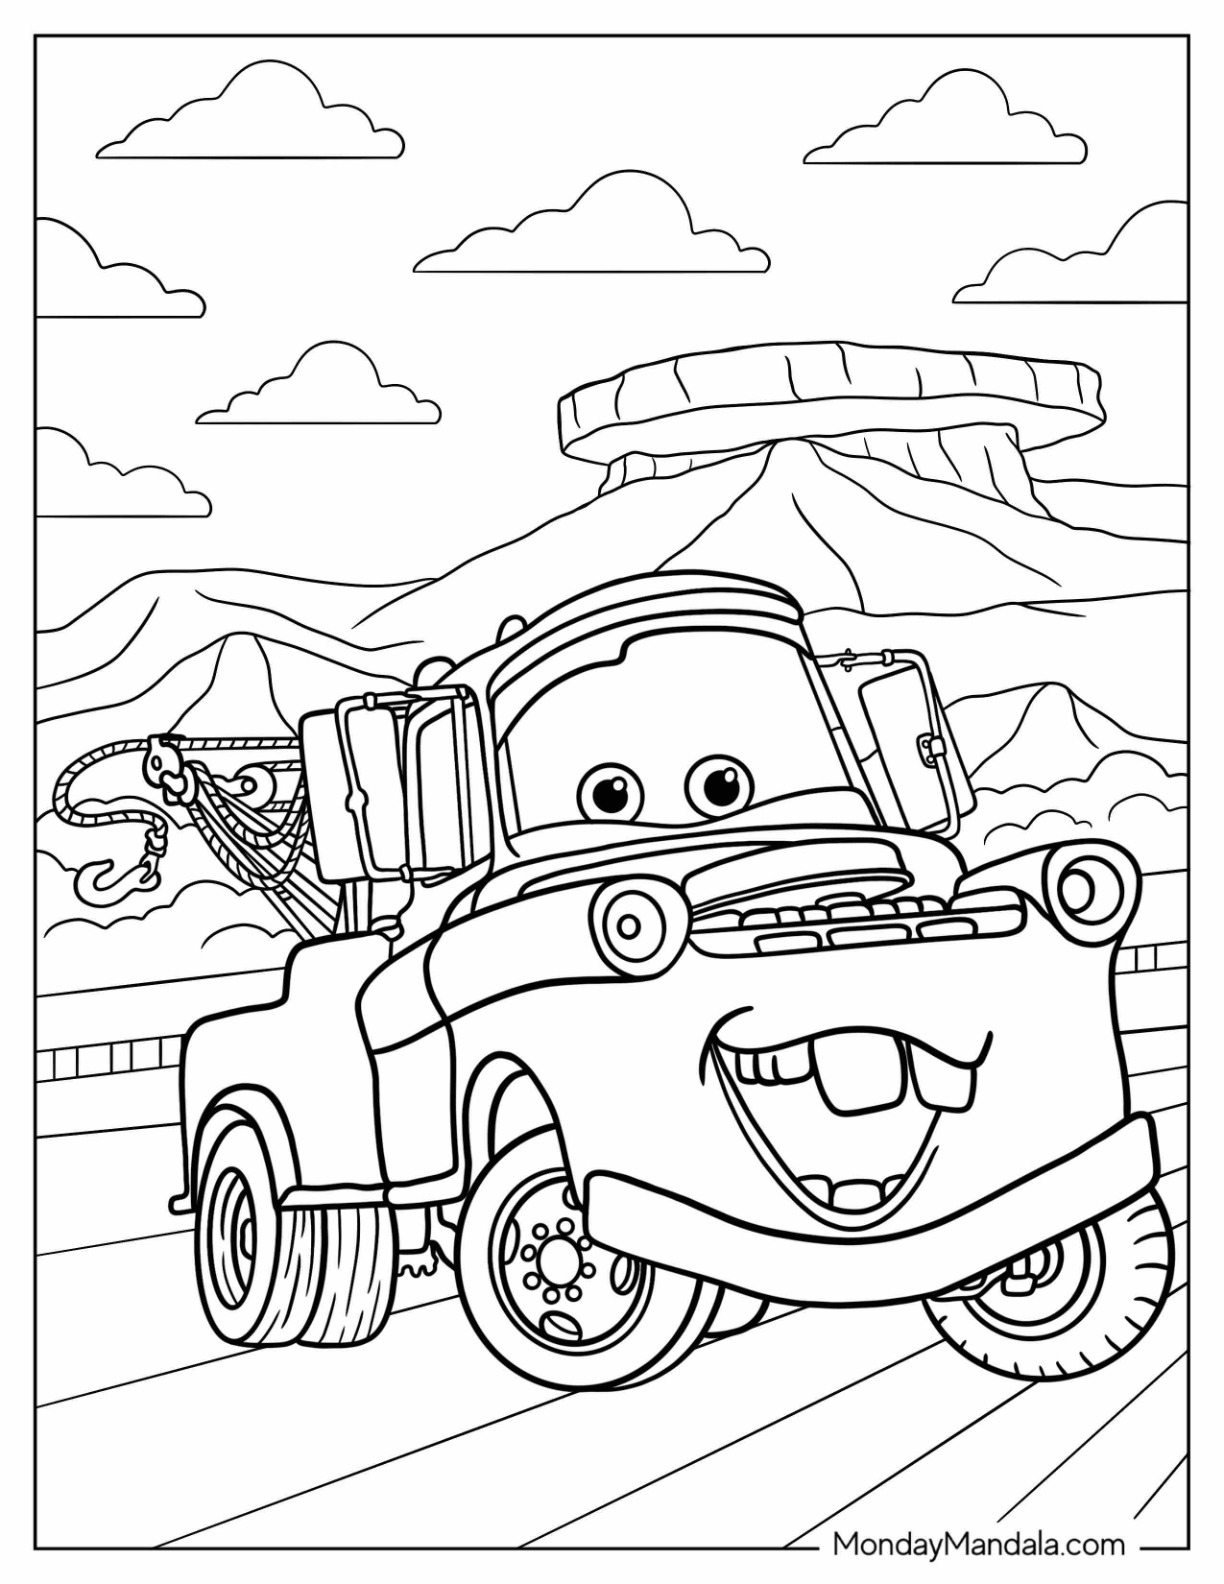 24 Disney Cars Coloring Pages (Free Pdf Printables) throughout Cars Colouring Pages Printable Free